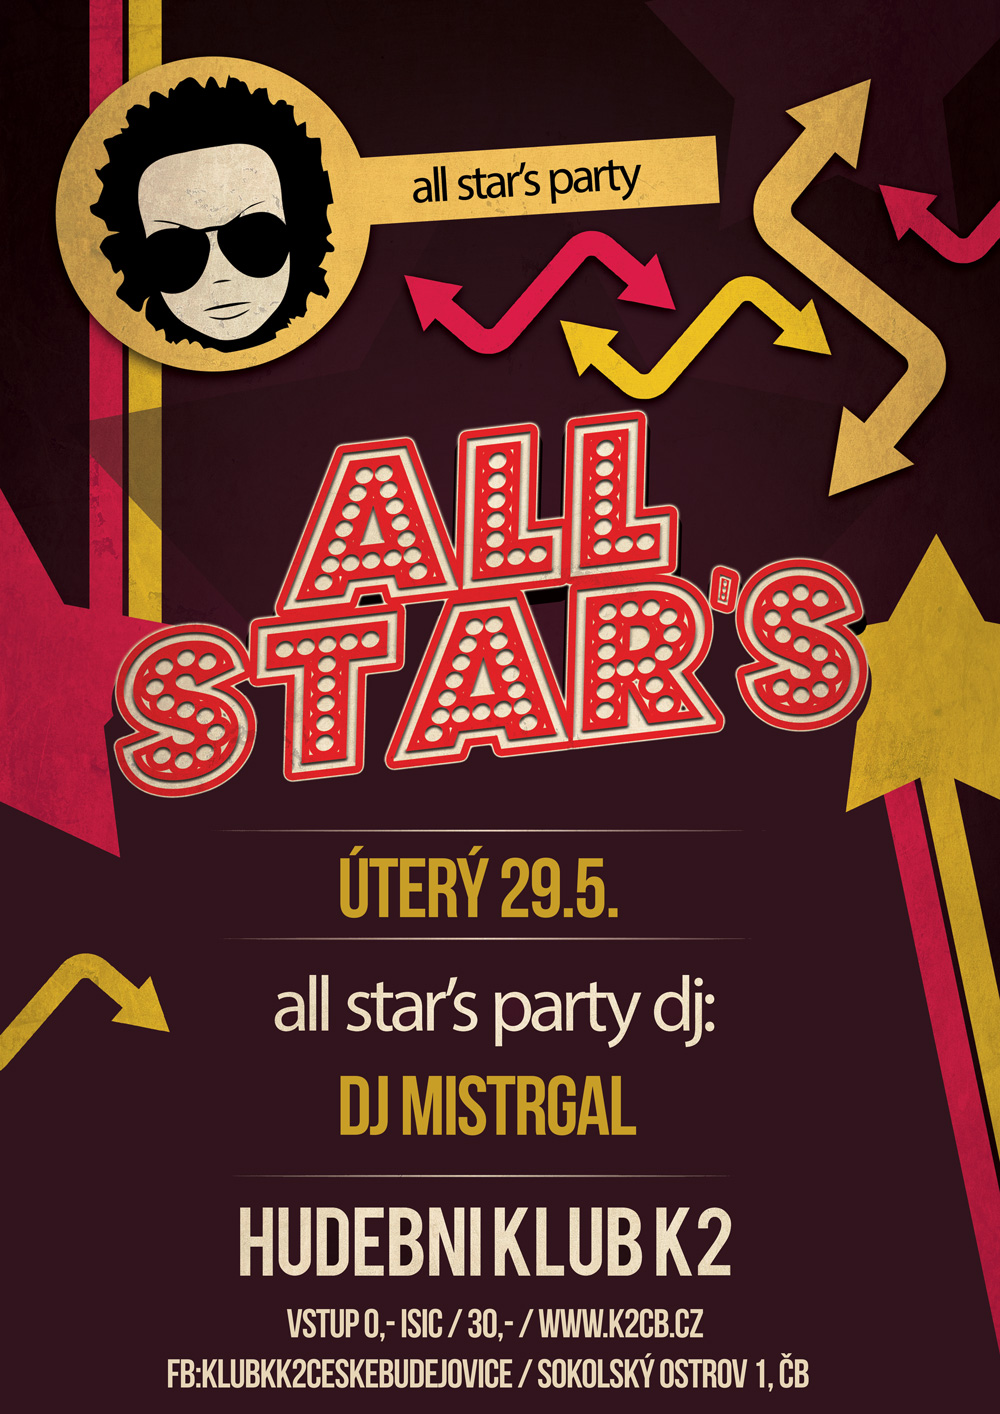 All star's party